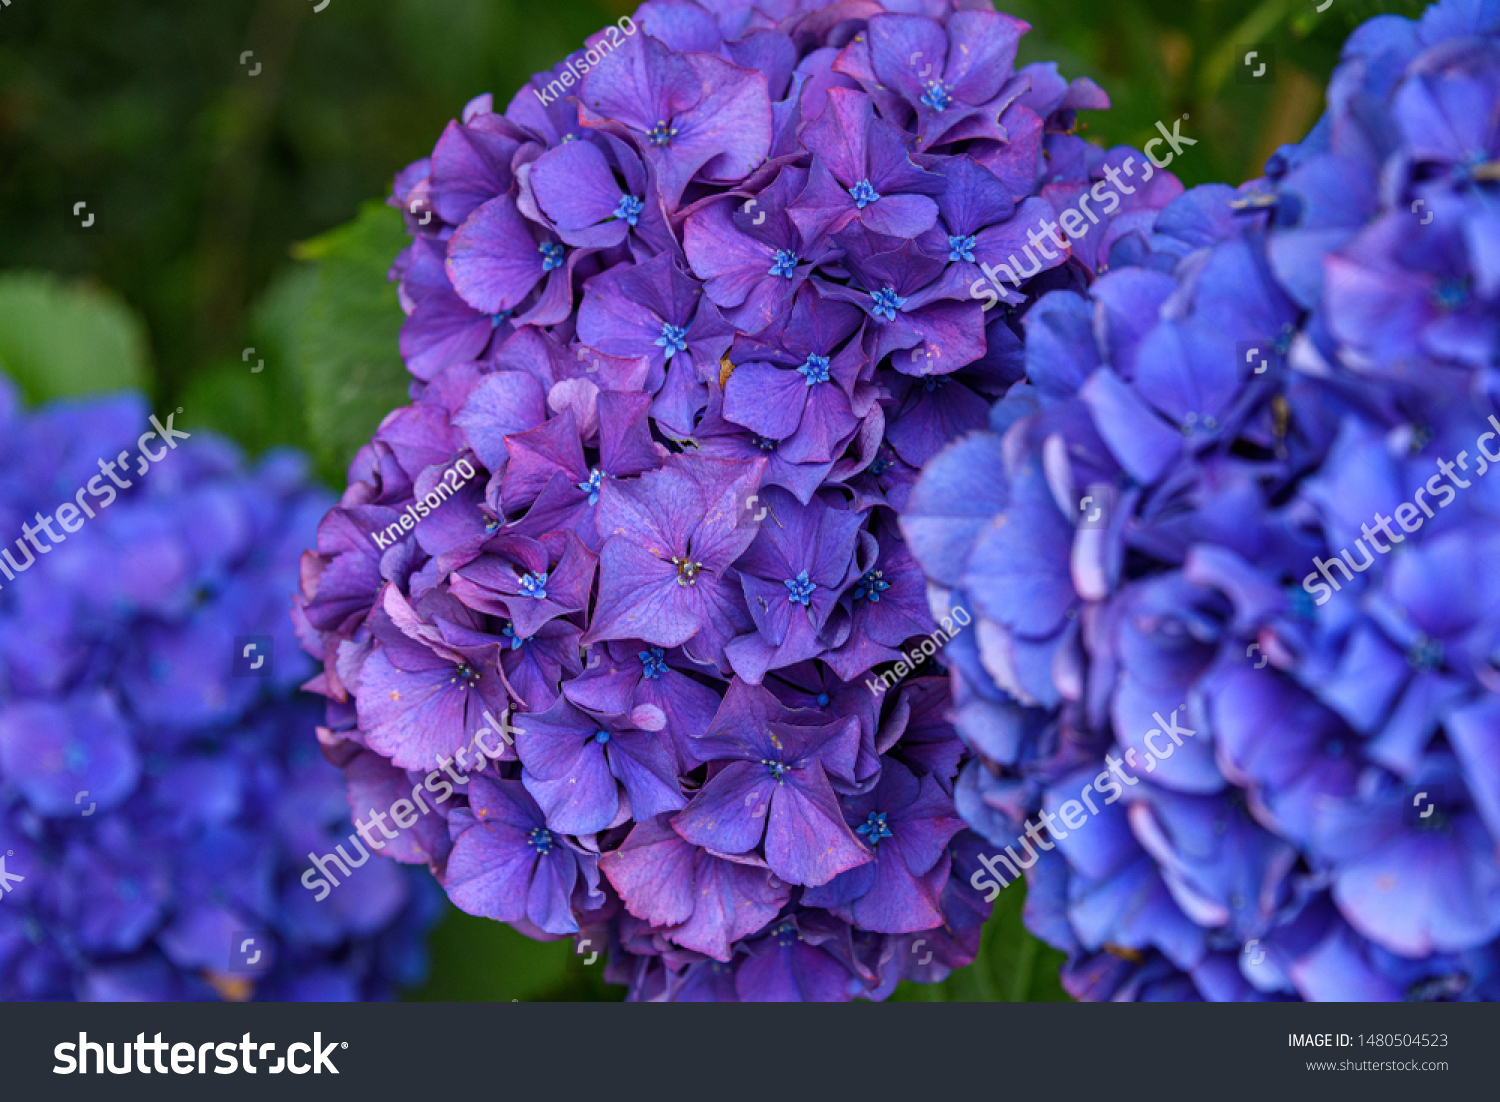 Close up of a purple hydrangea bloom growing in a garden, blue blooms in foreground and background
 #1480504523